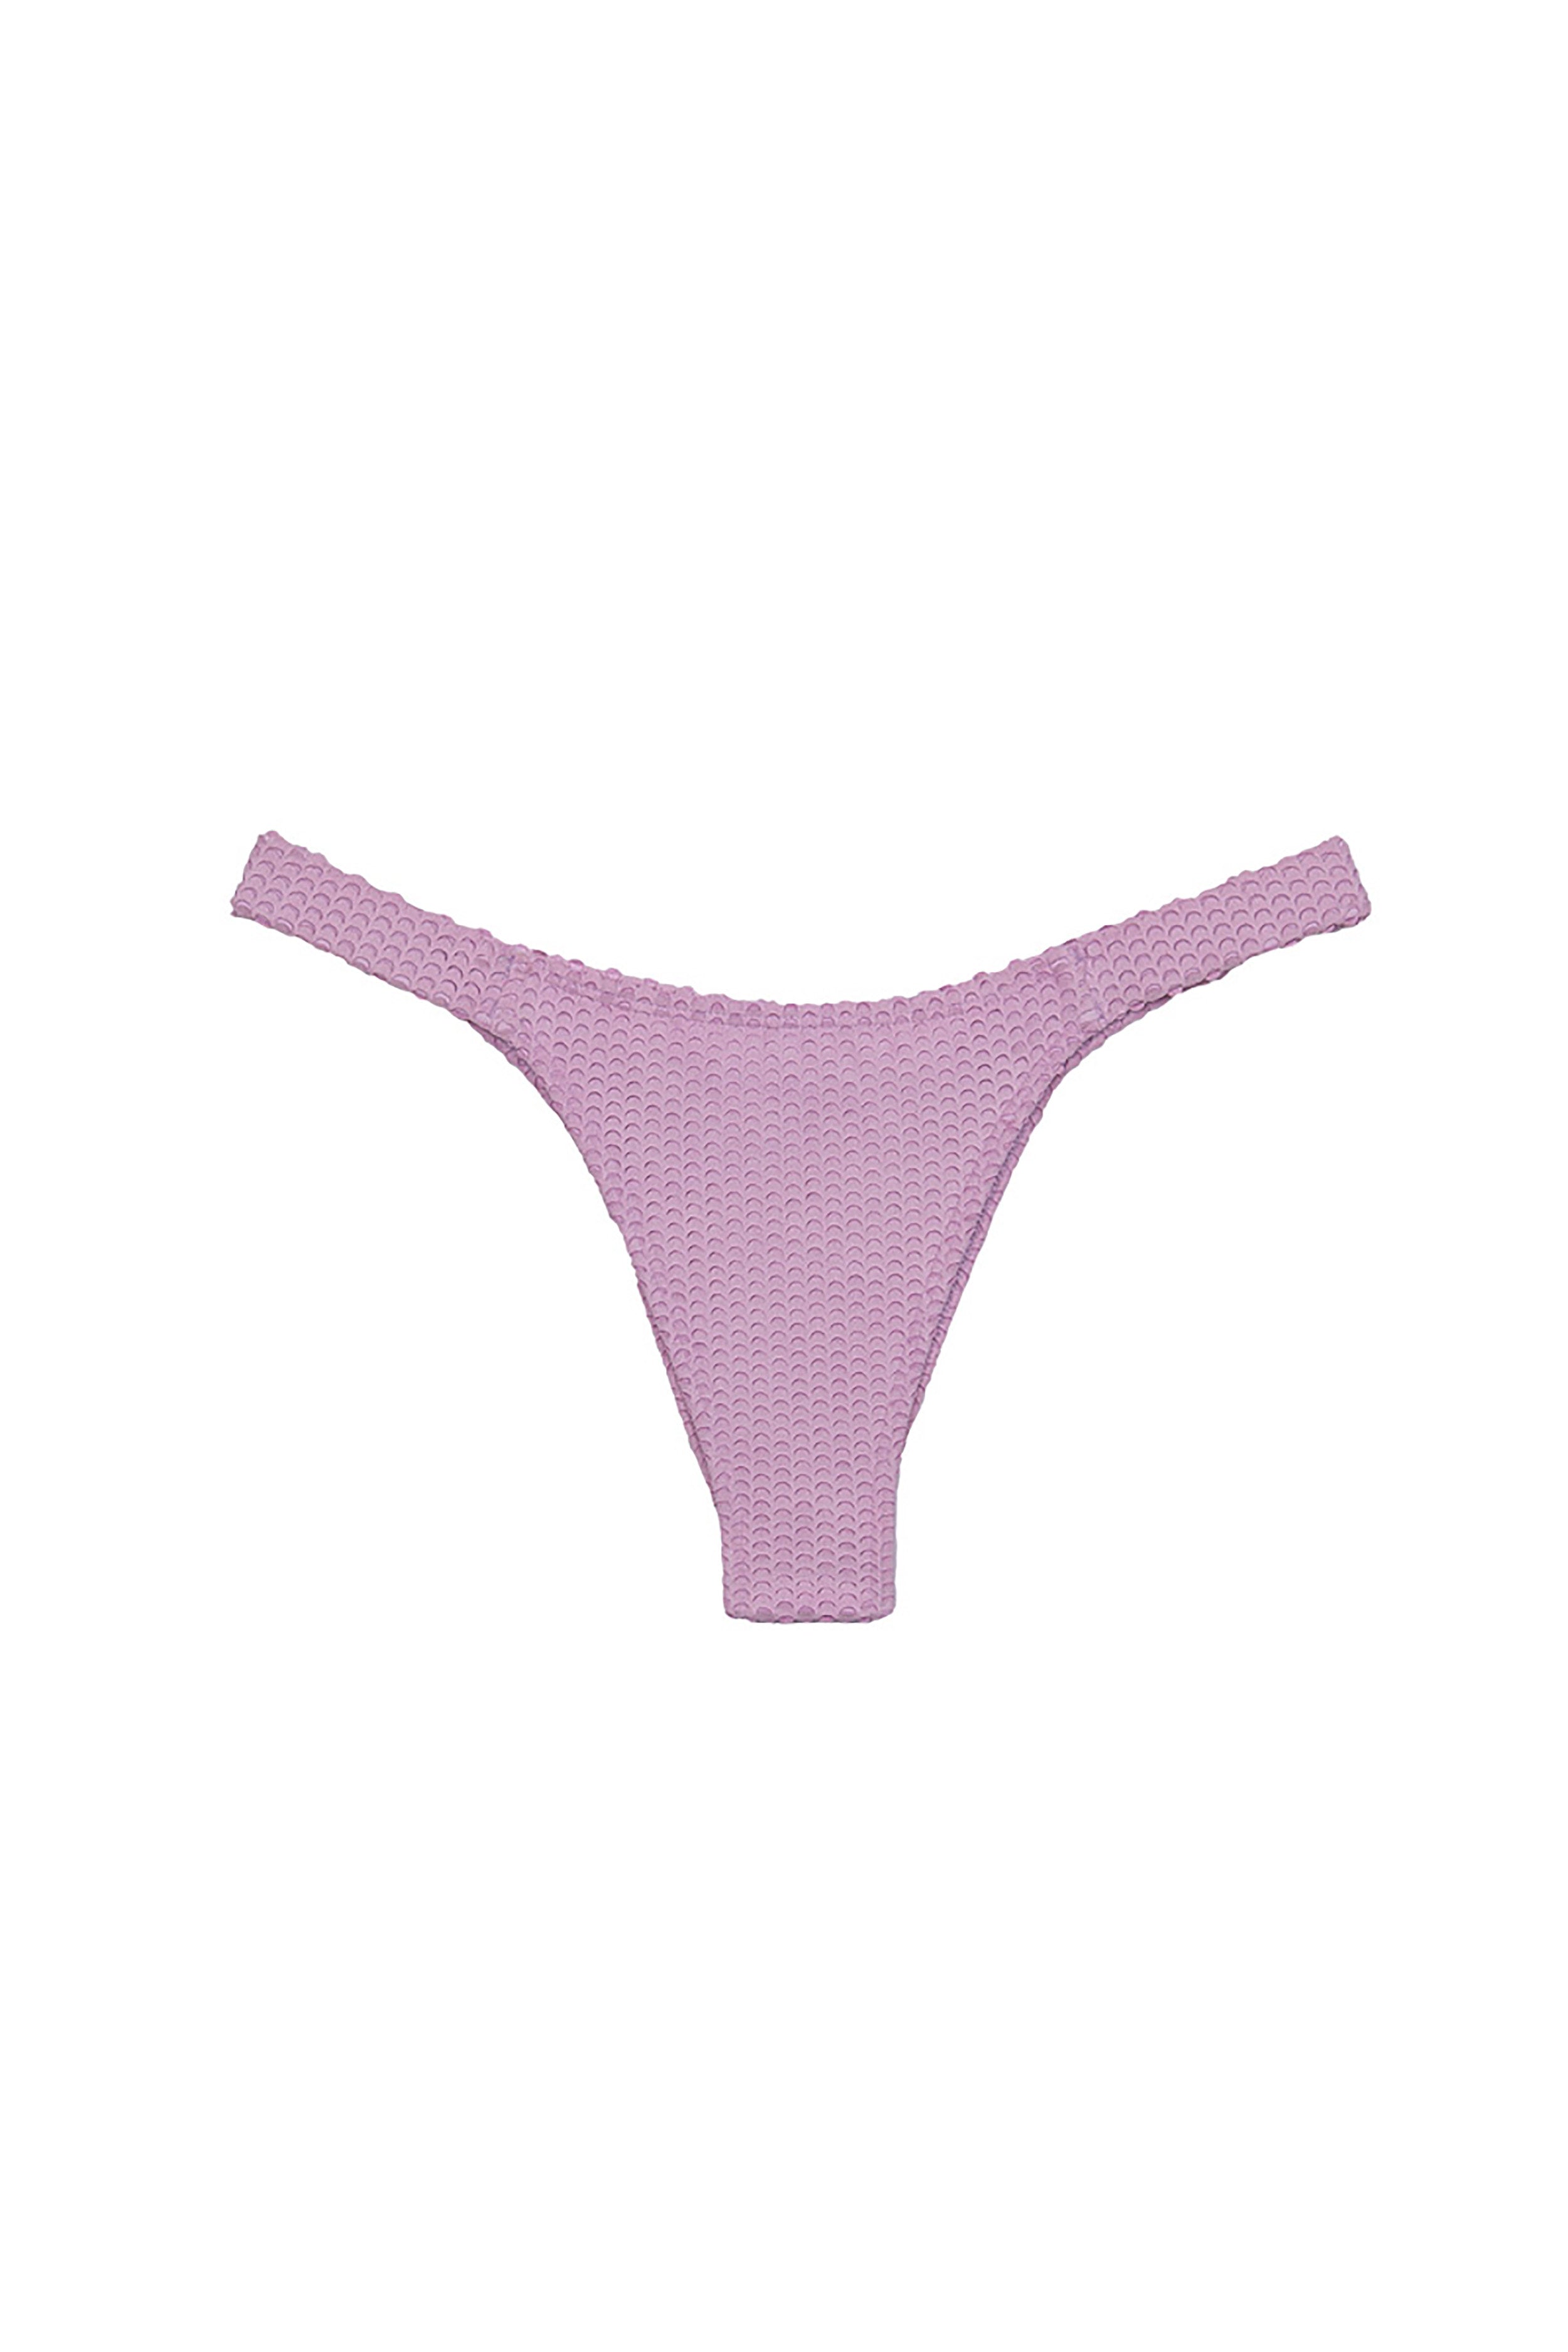 VIX | 250-758-182 | SCALES BASIC BOTTOM CHEEKY | RED PINK | L | Women's ...